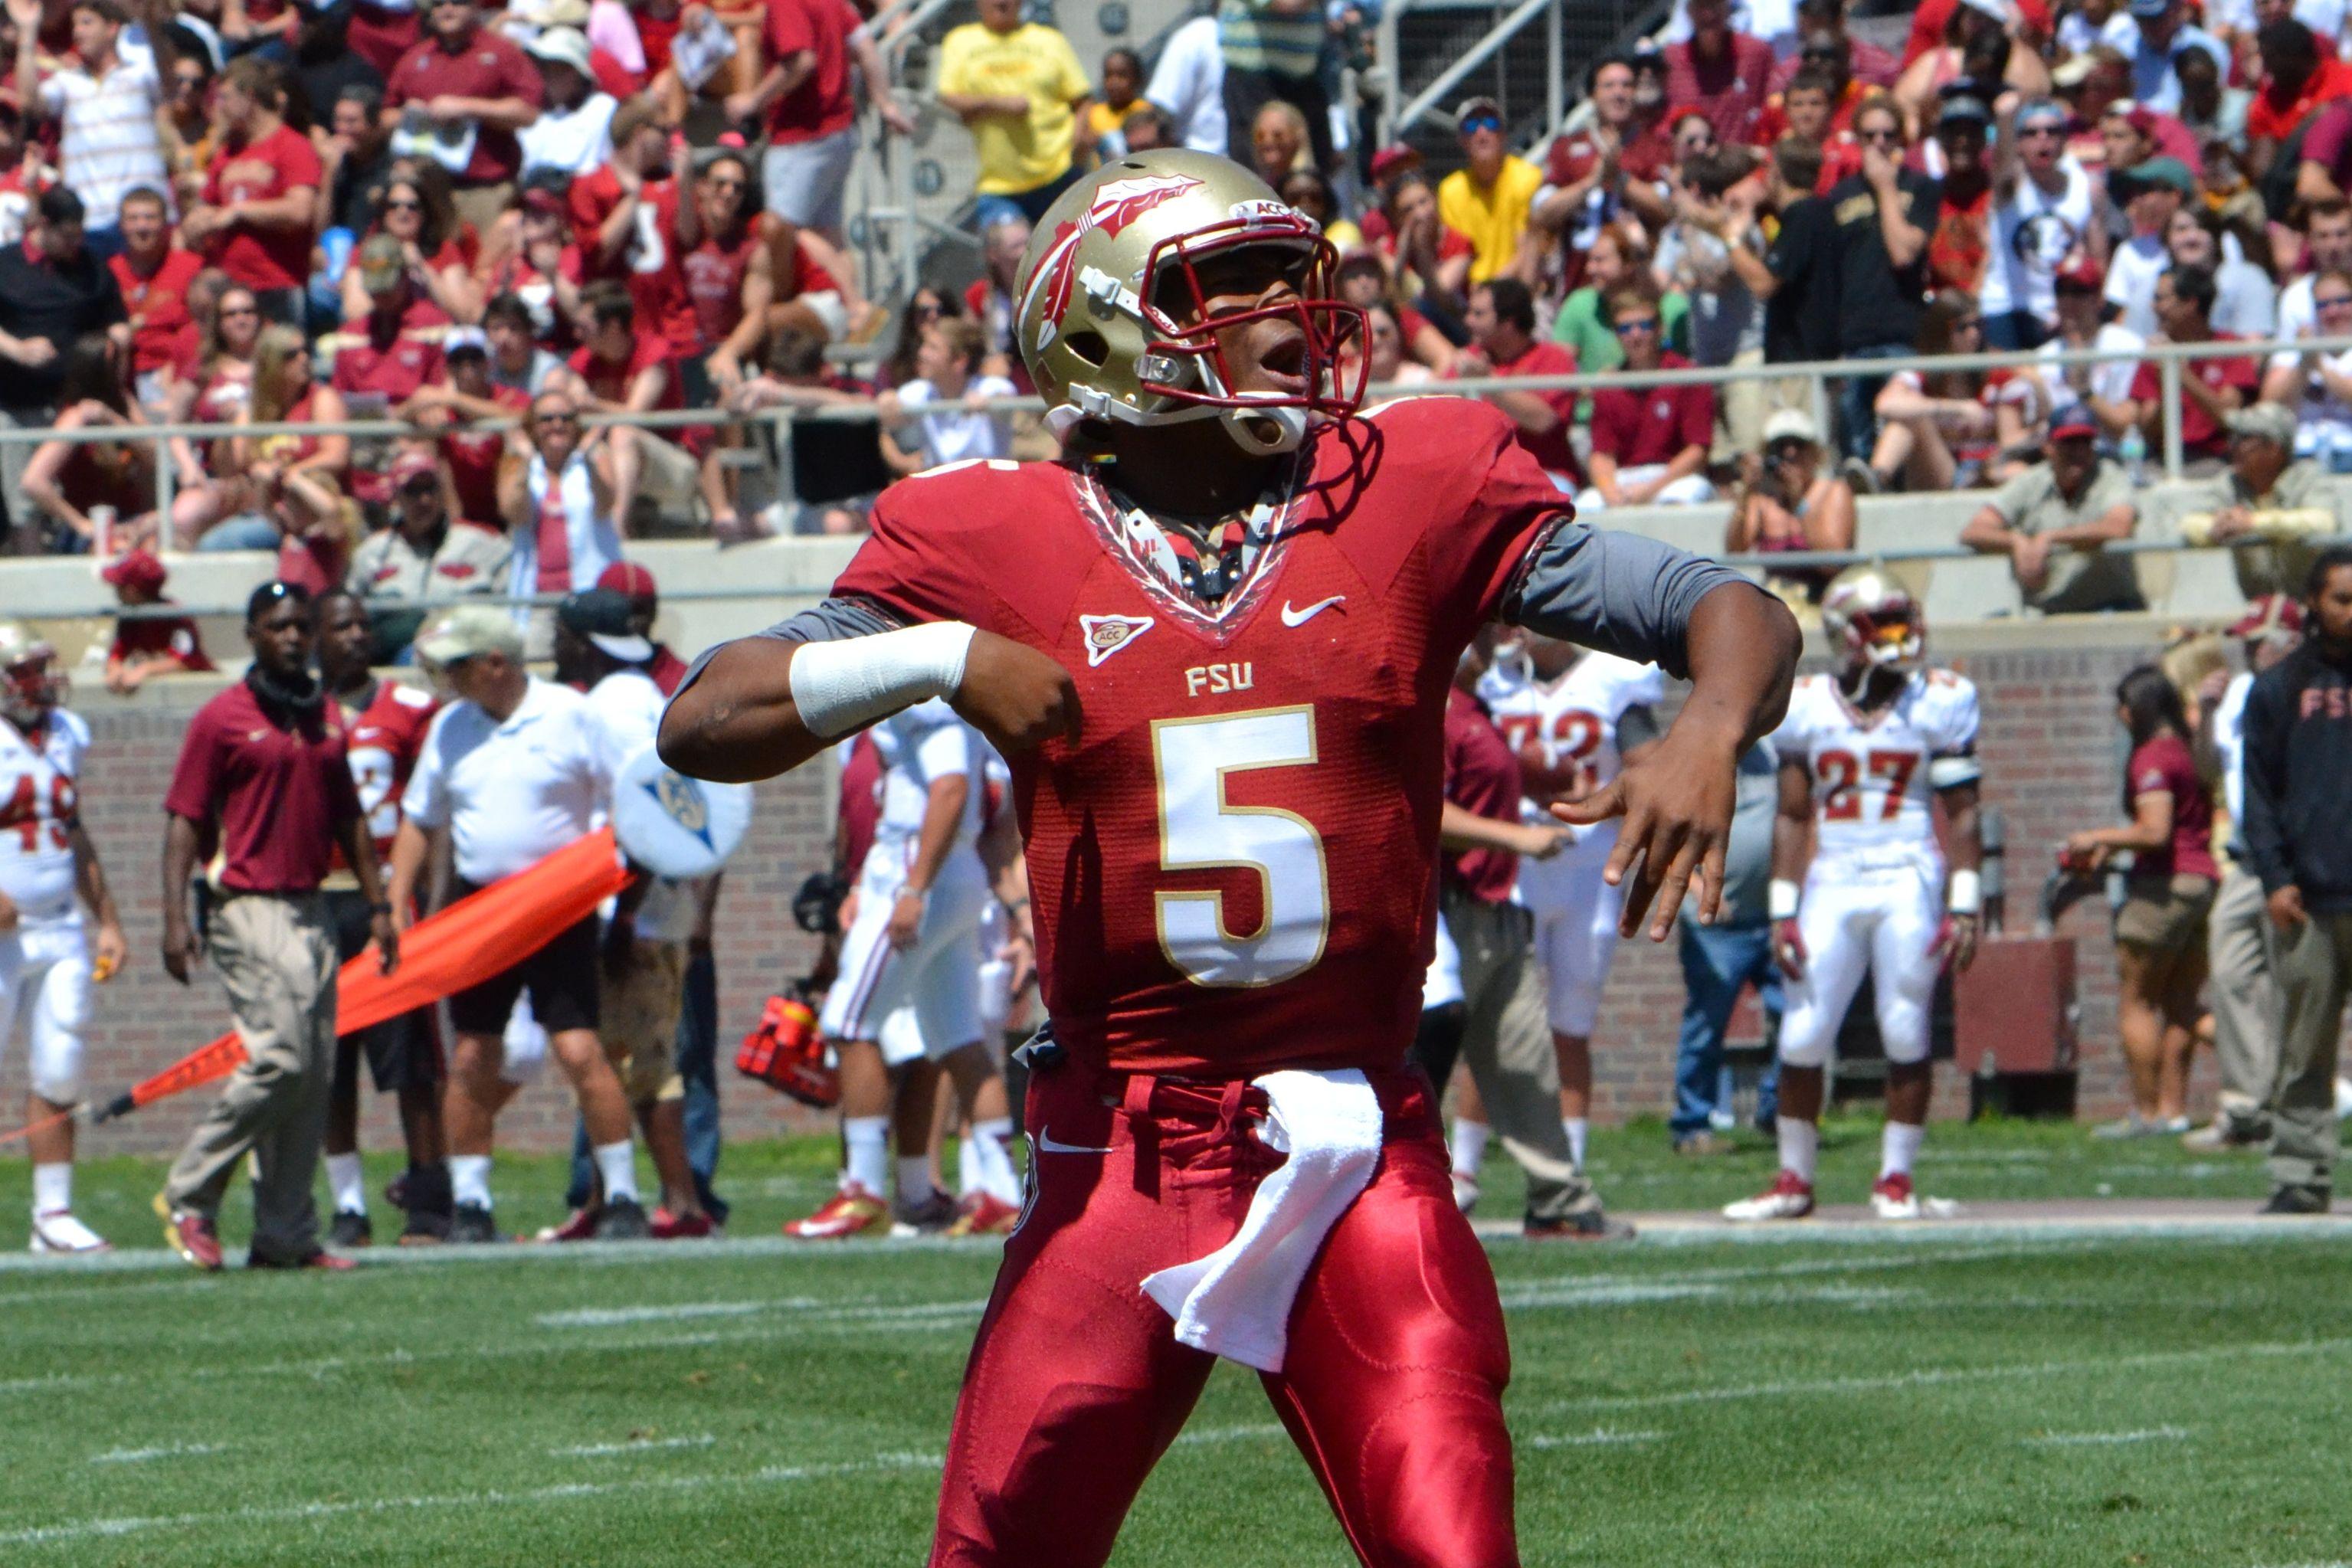 Jameis Winston Wins over Fans in FSU Spring Game